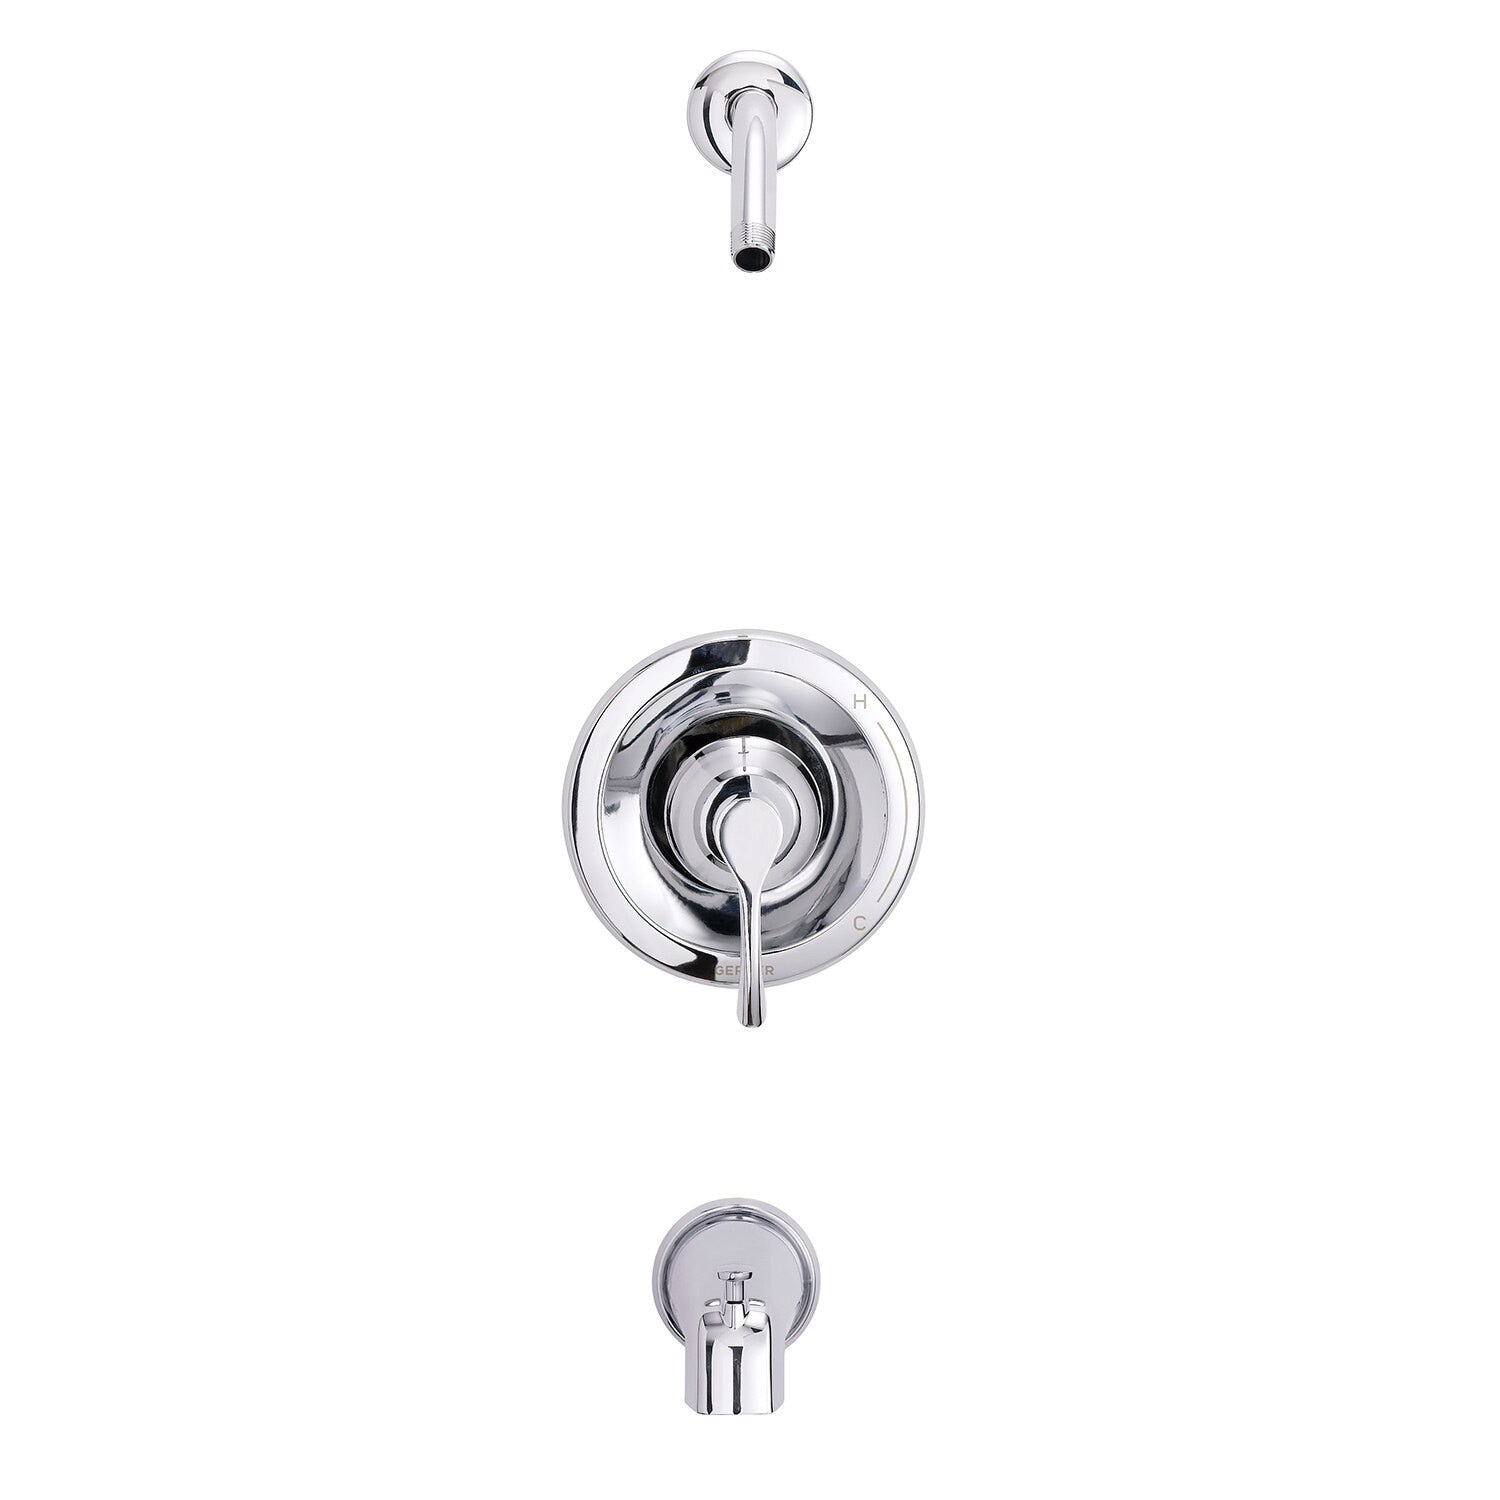 Danze by Gerber Antioch 1H Tub and Shower Trim Kit and Treysta Cartridge w/ Diverter on Spout Less Showerhead